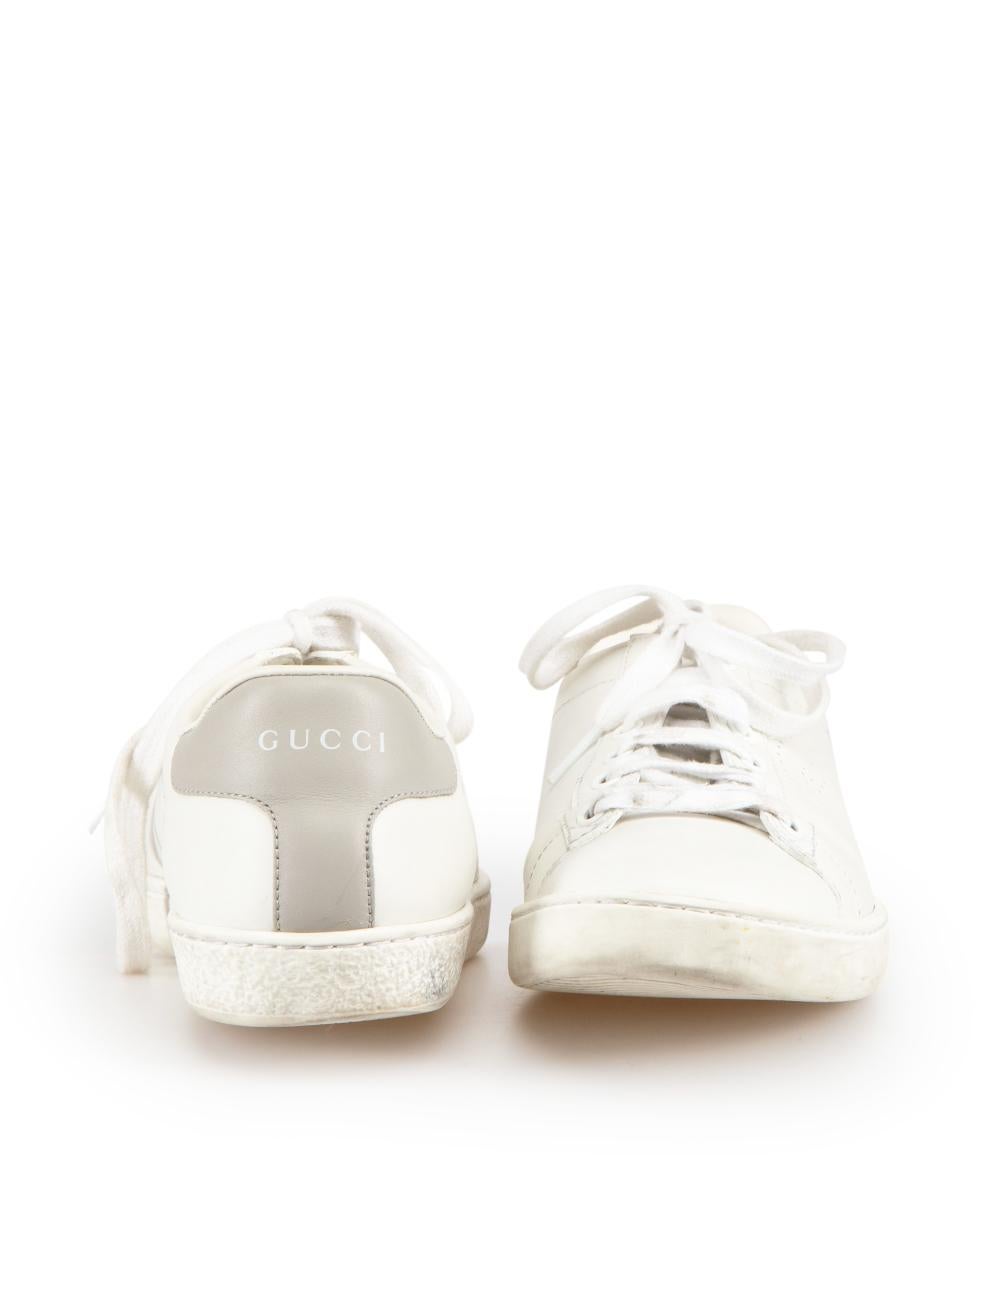 Gucci White Leather Perforated GG Logo Trainers Size IT 38 In Good Condition For Sale In London, GB